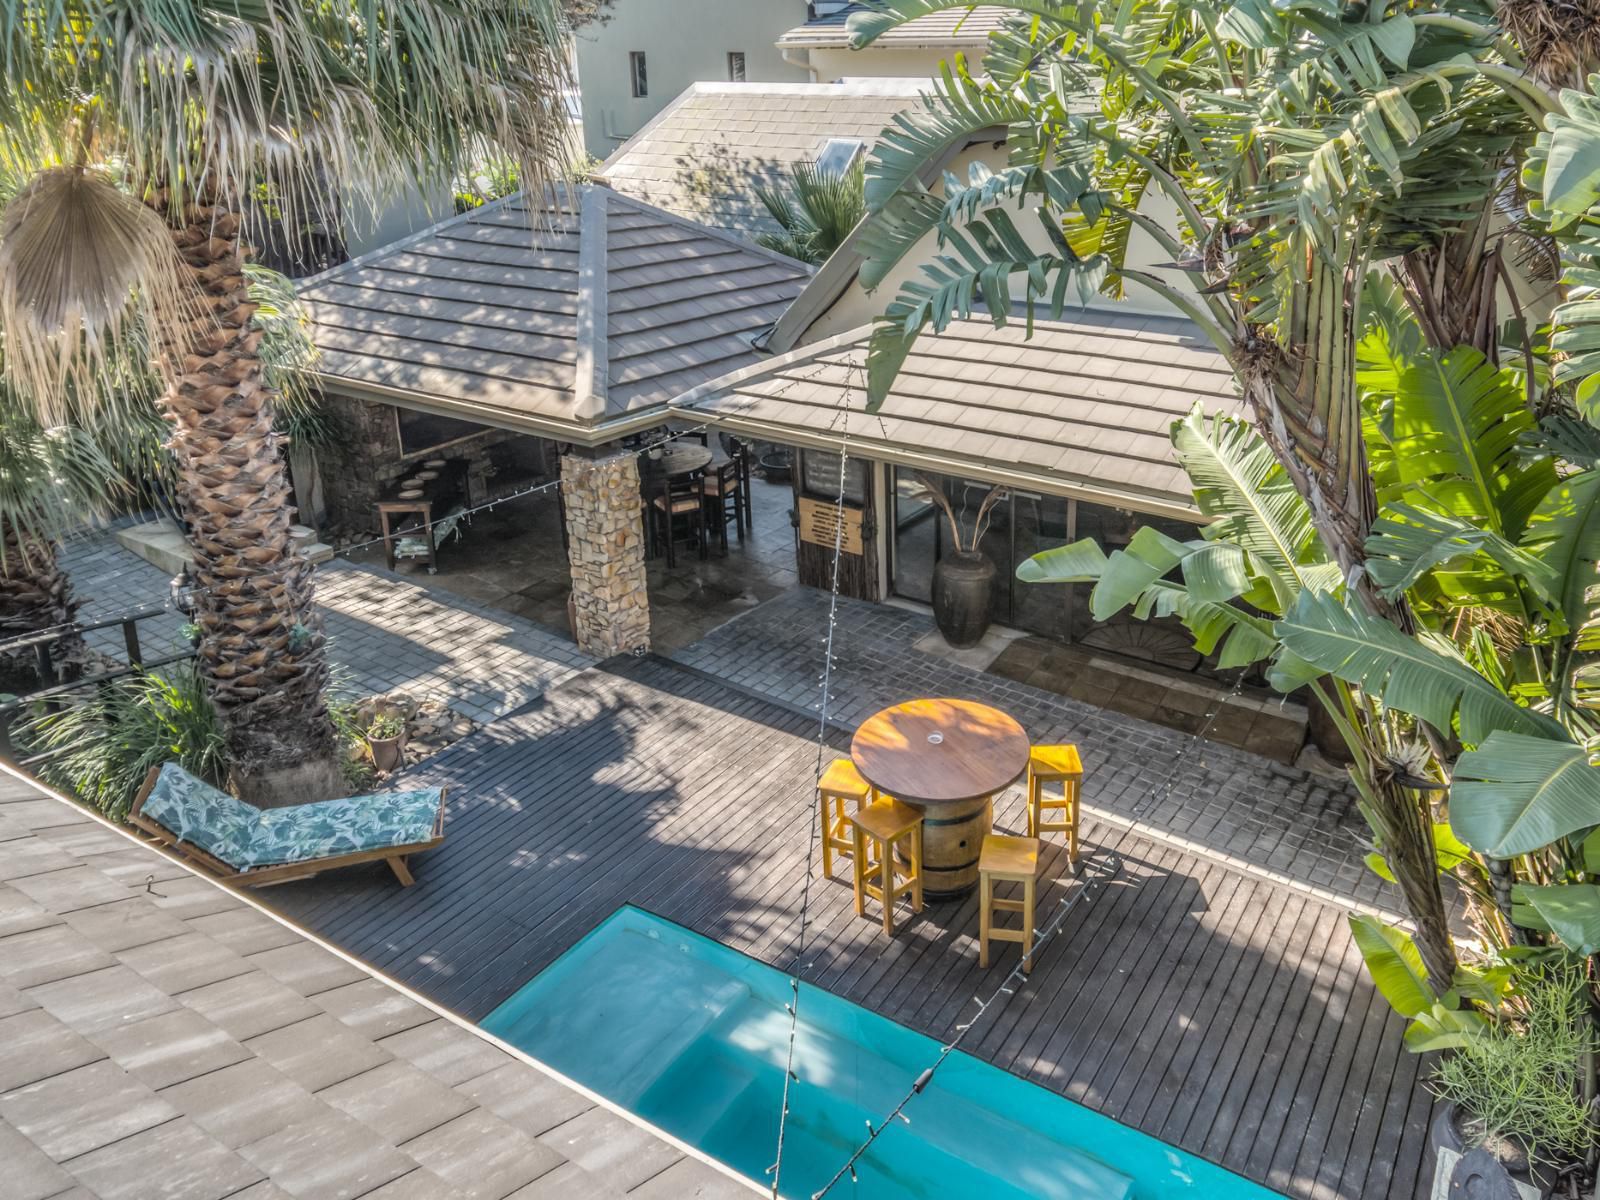 Onse Khaya Lodge And Conferencing Summerstrand Port Elizabeth Eastern Cape South Africa House, Building, Architecture, Palm Tree, Plant, Nature, Wood, Garden, Swimming Pool